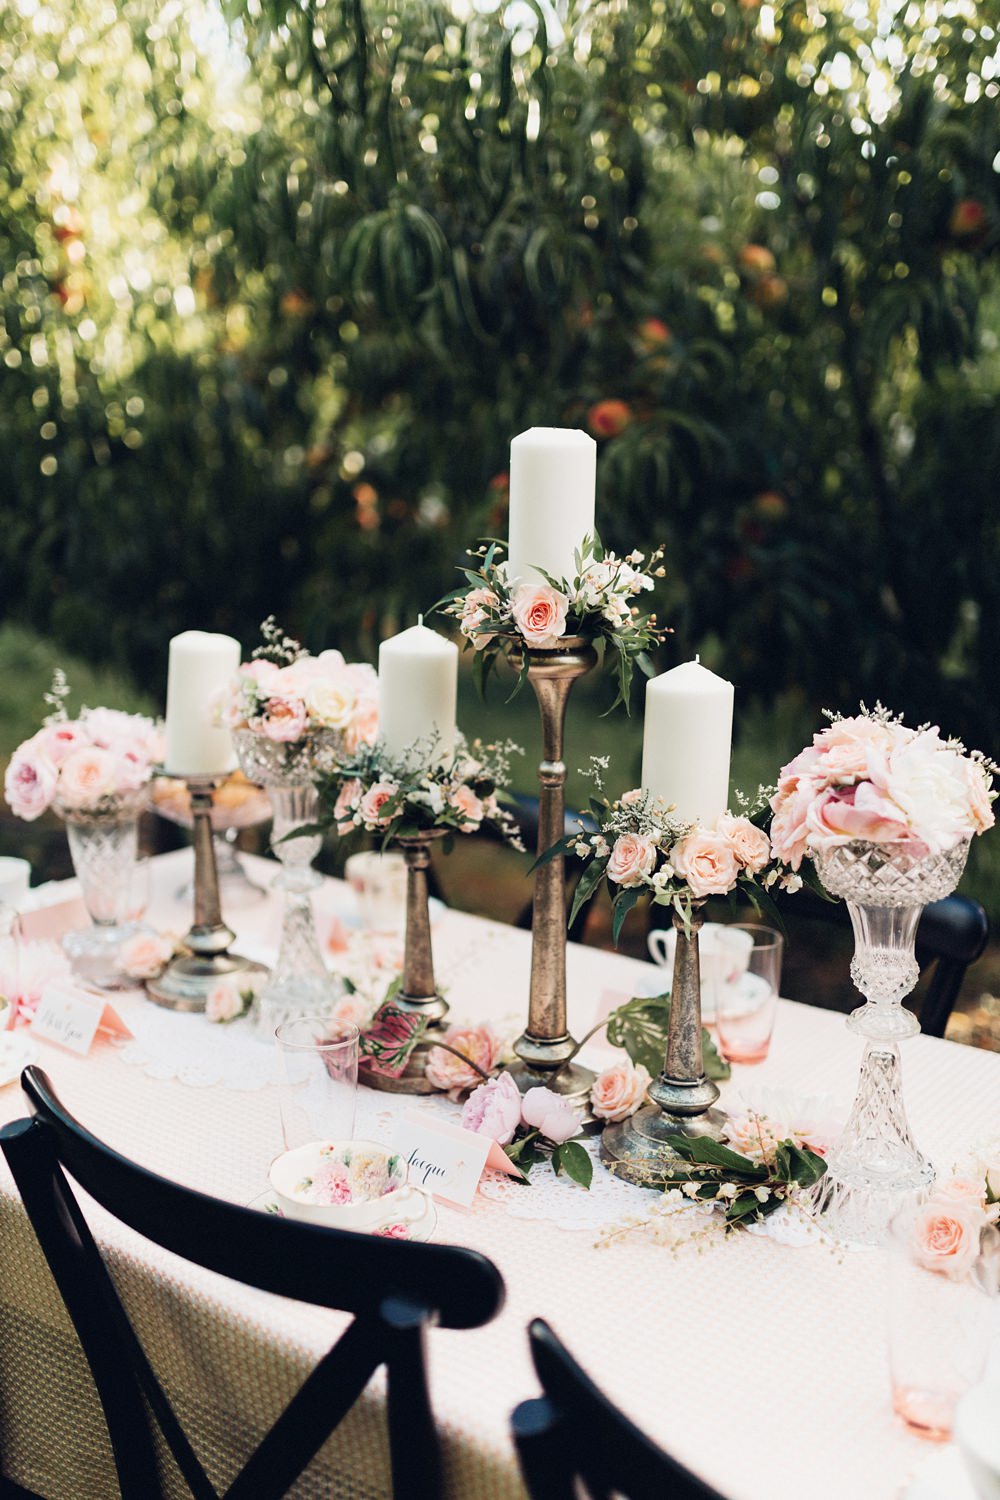 Romantic Blush Garden Wedding Centerpiece Decoration with Candles and Roses // 15 Stunning Ways to Decorate with Candles // http://mysweetengagement.com